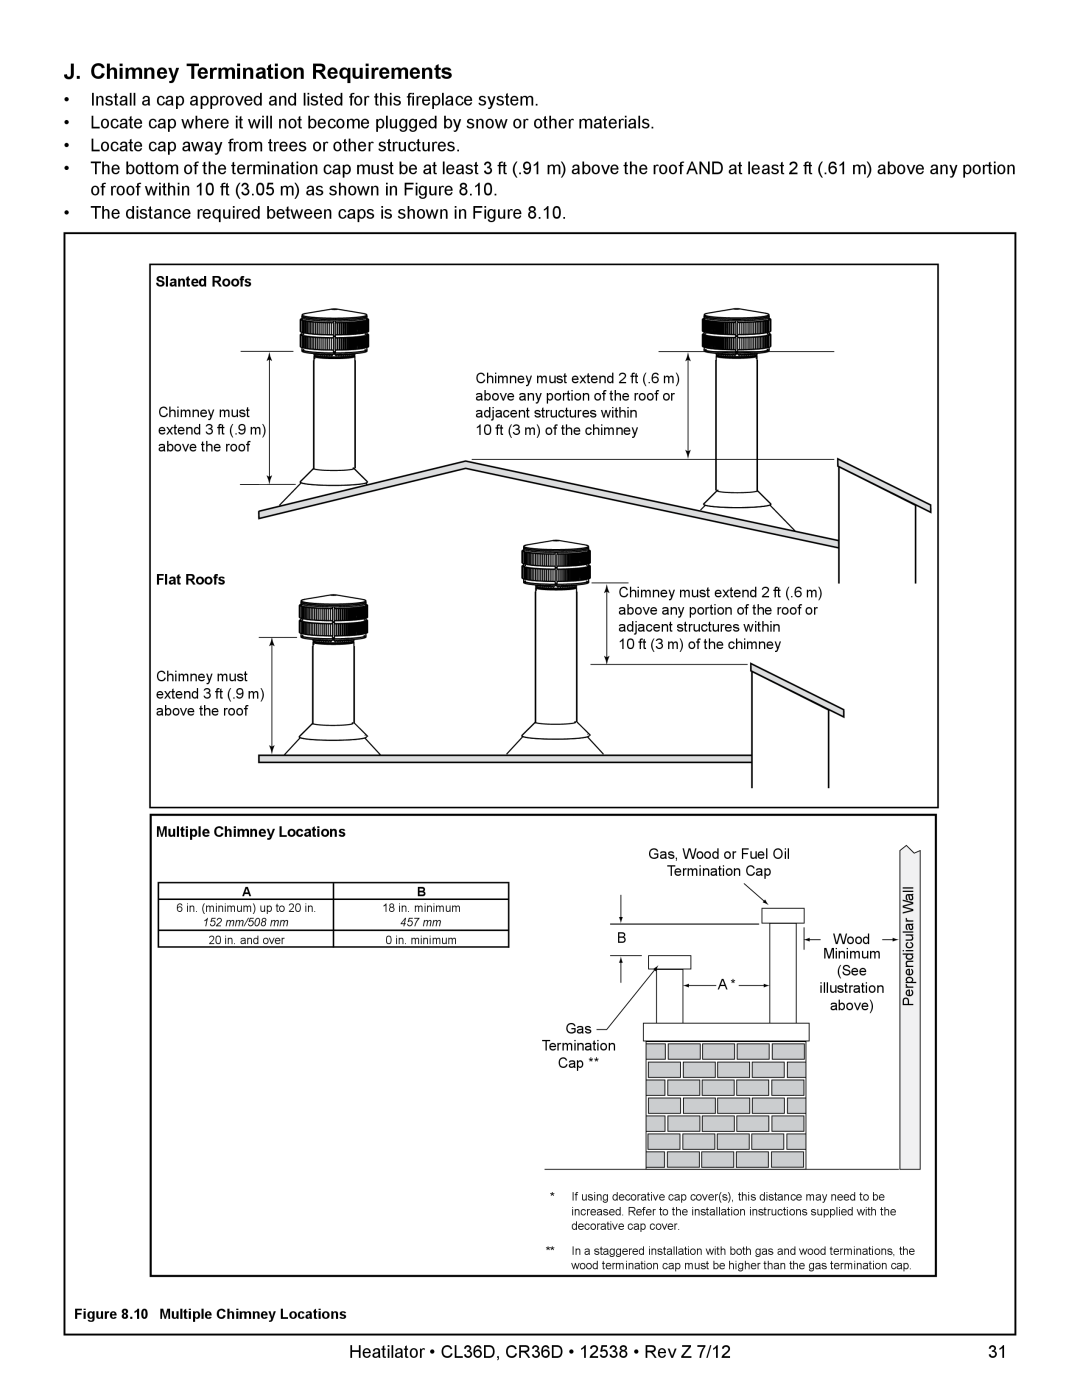 Heatiator CL36D owner manual J. Chimney Termination Requirements 